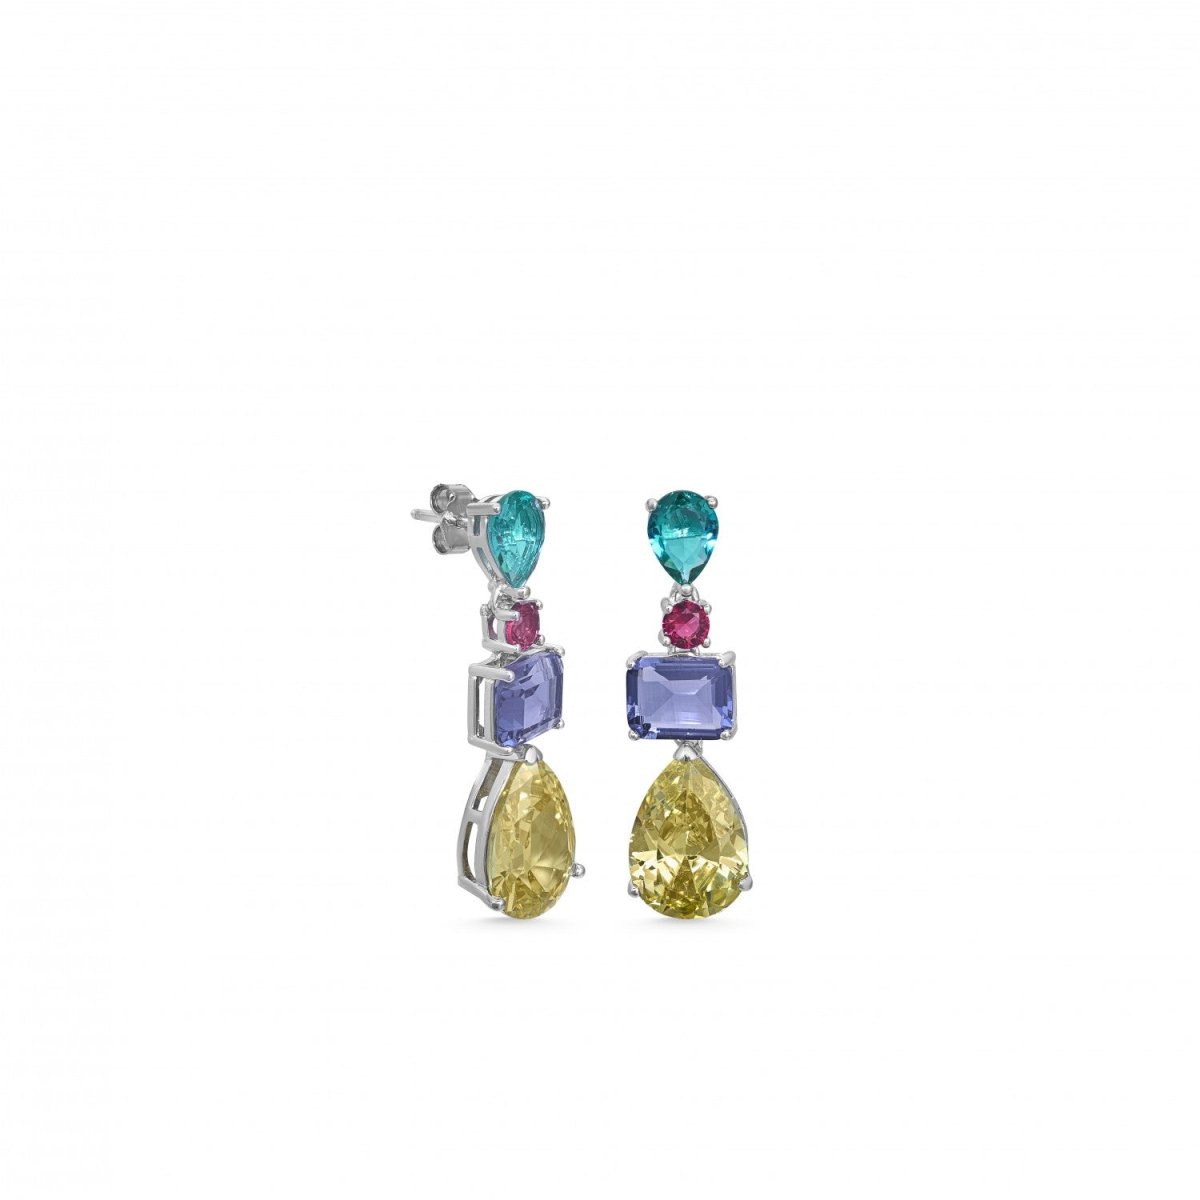 Earrings - Earrings with colored stones pendant design in different sizes